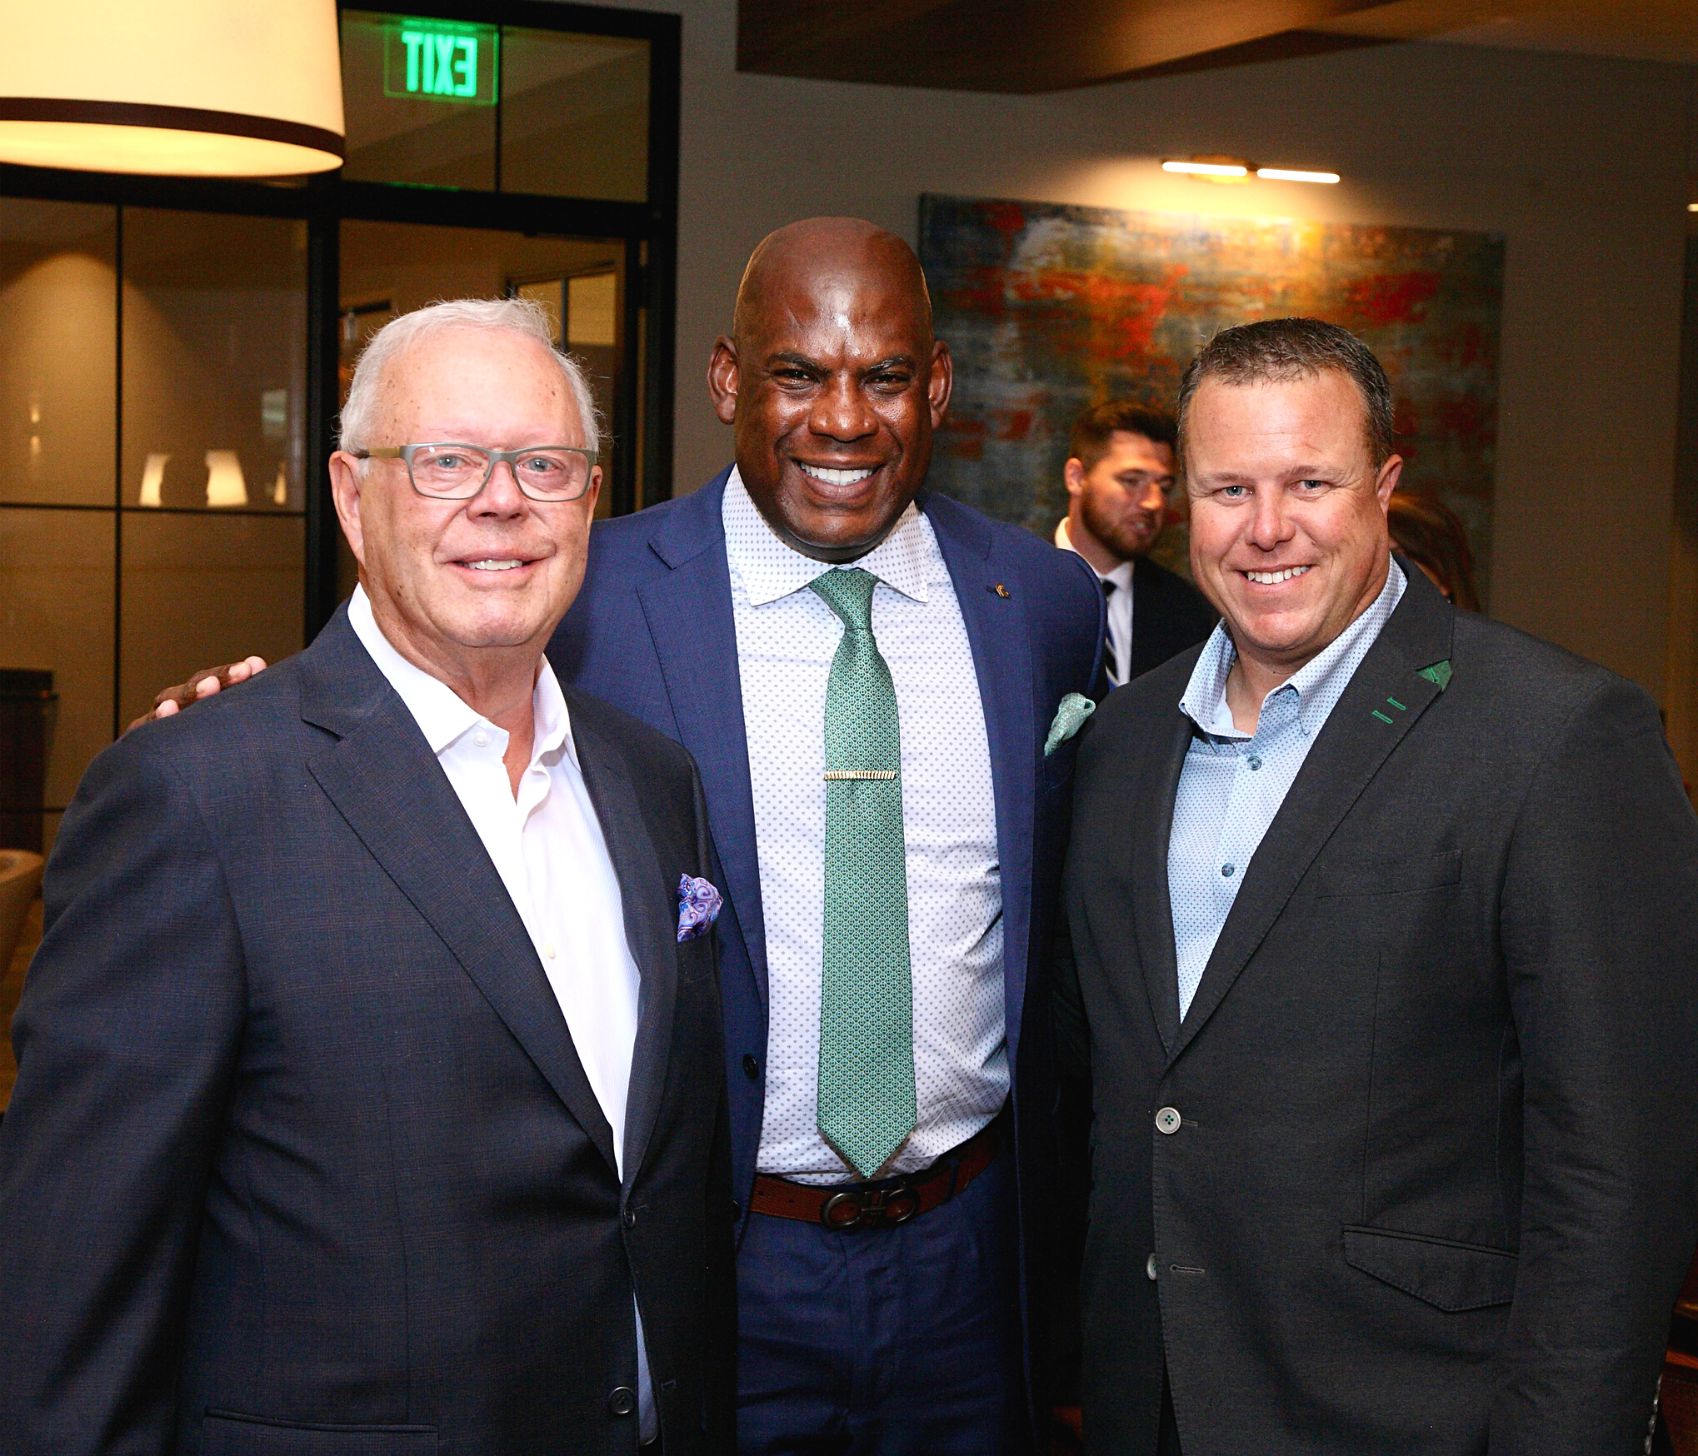 Harold Zeigler, Mel Tucker and Aaron Zeigler at the 40th Annual Drive for Life Foundation Gala which raised over $2M for charity